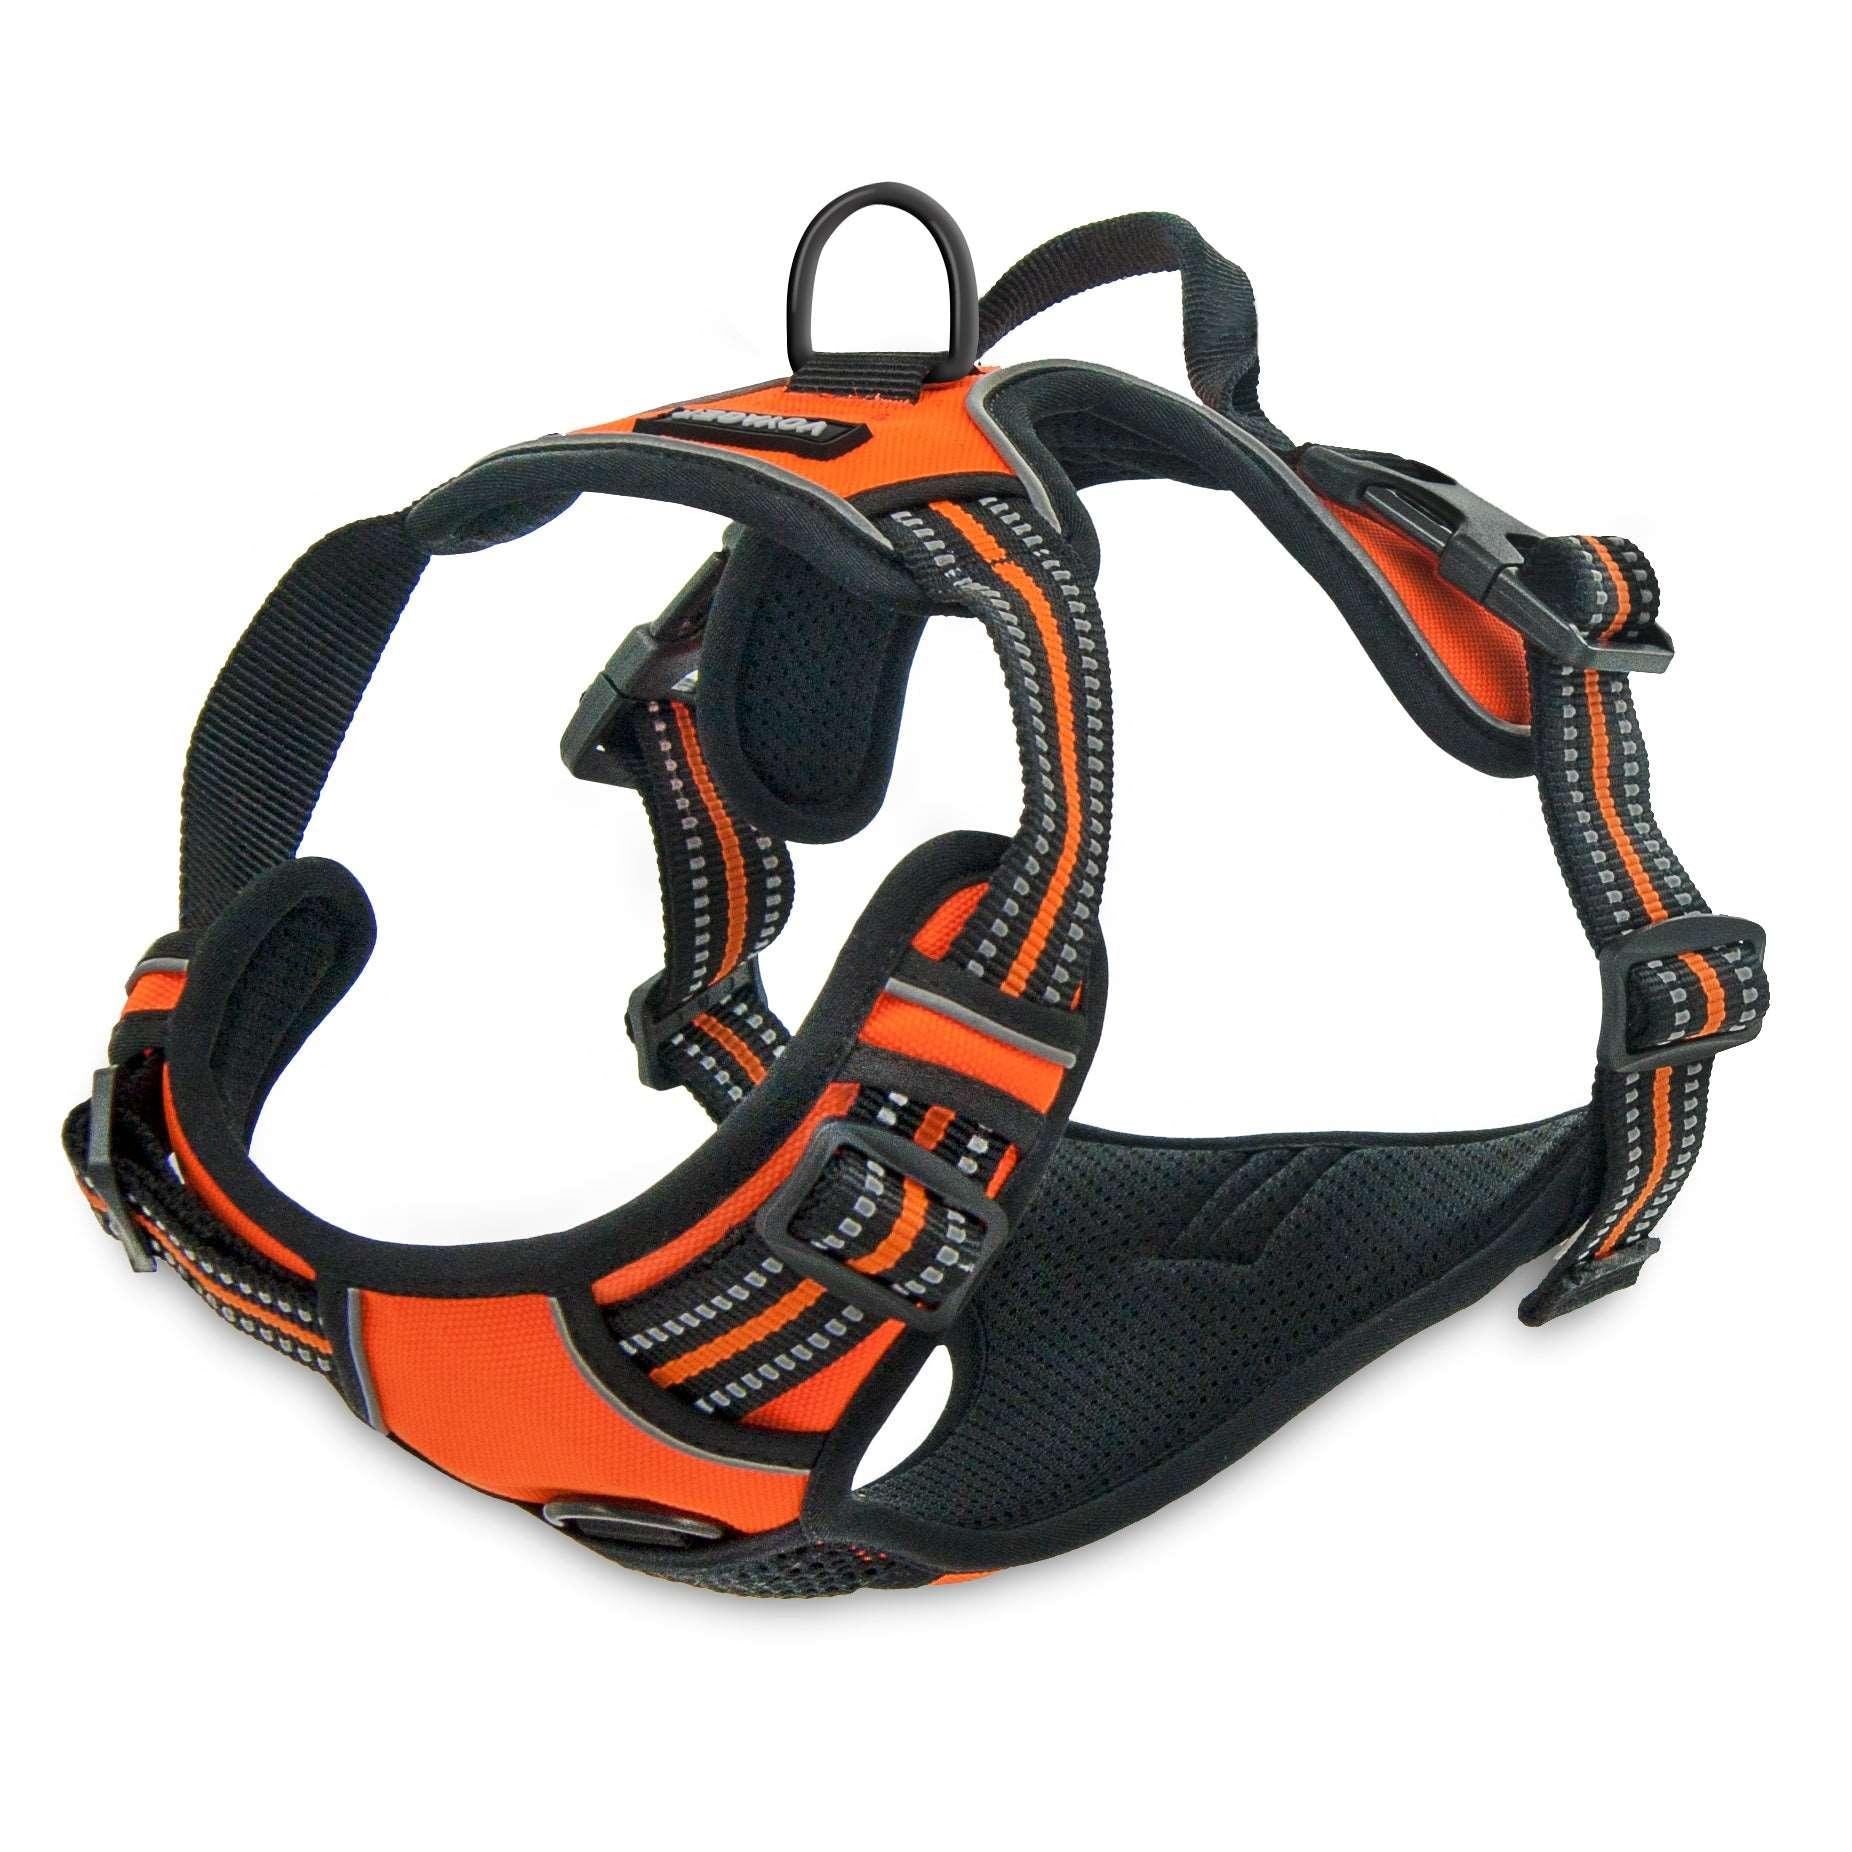 VOYAGER Dual-Attachment Dog Harness in Orange - Expanded